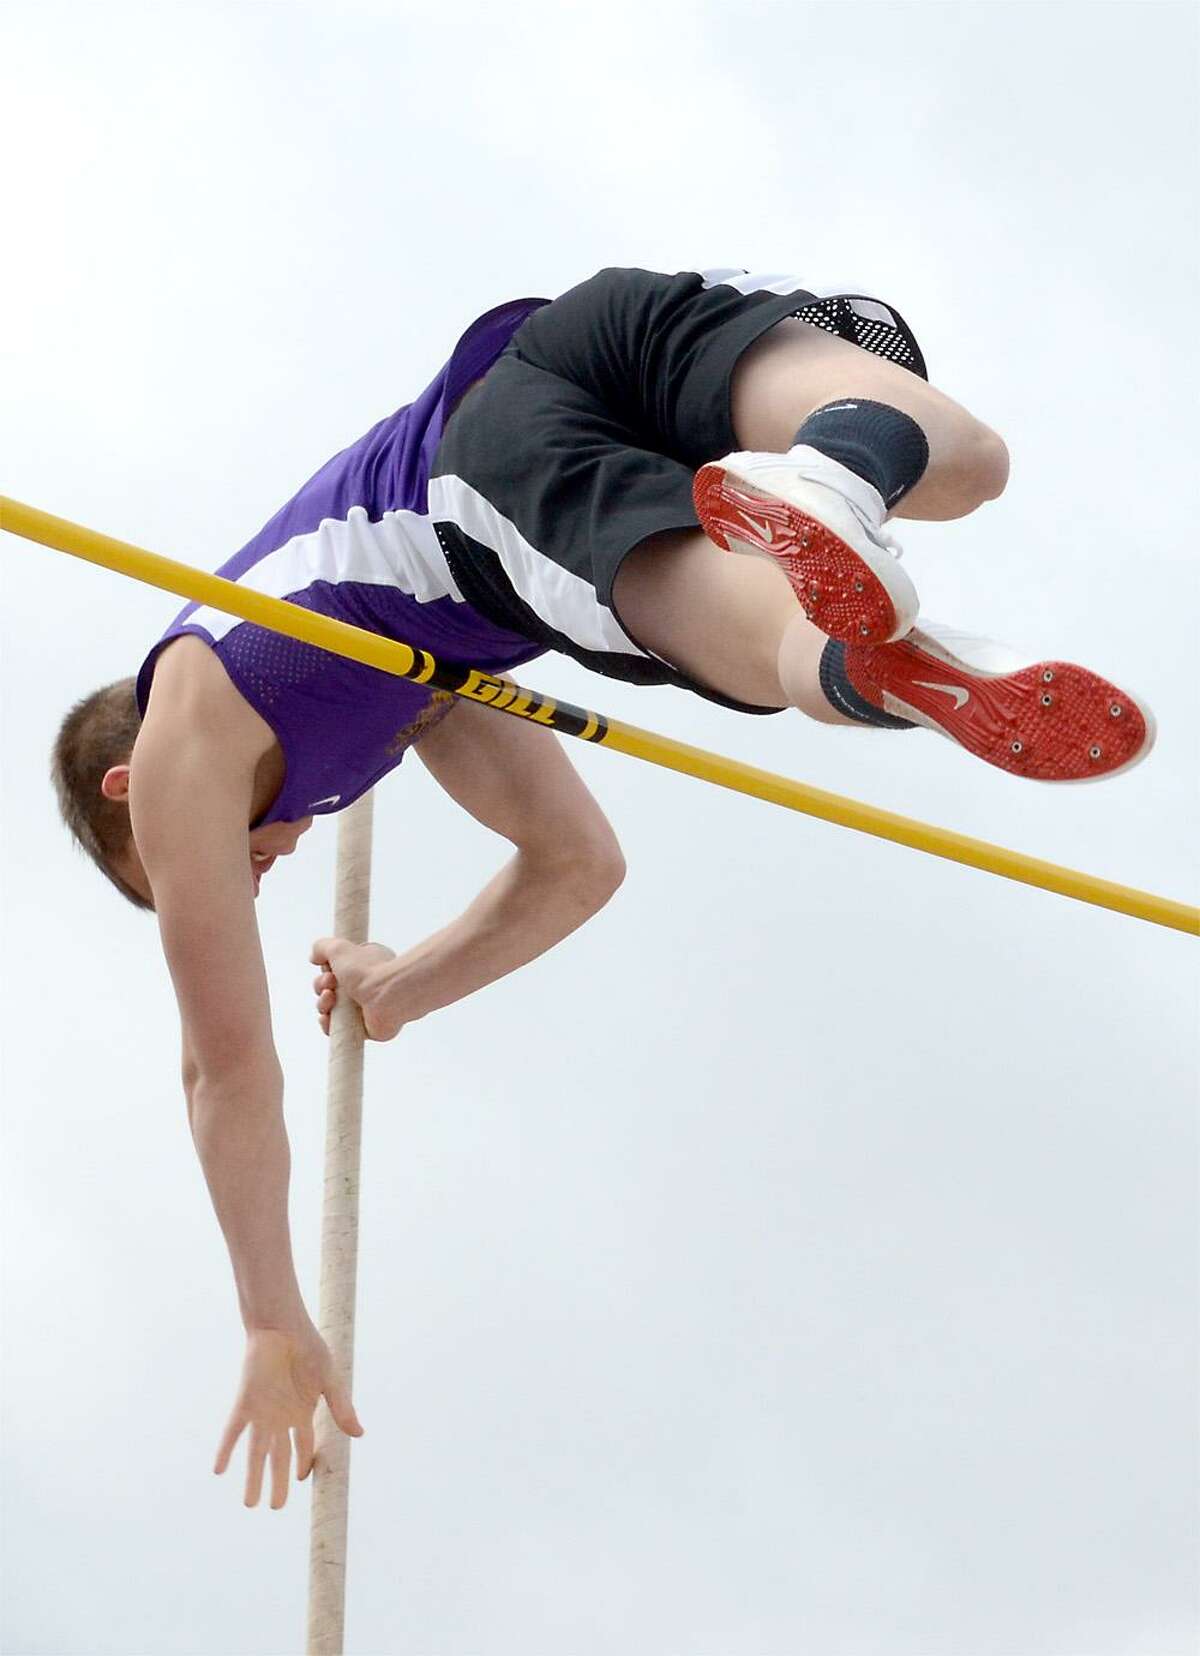 Dispatch Staff Photo by DAVID M. JOHNSON Holland Patent's Elliot Connor took first place in the pole vault at the boys track and field Tri-Valley League Relays at Oneida on Wednesday. The hosts won the meet with 108.5 points. Proctor was second with 83 and HP was next with 72.